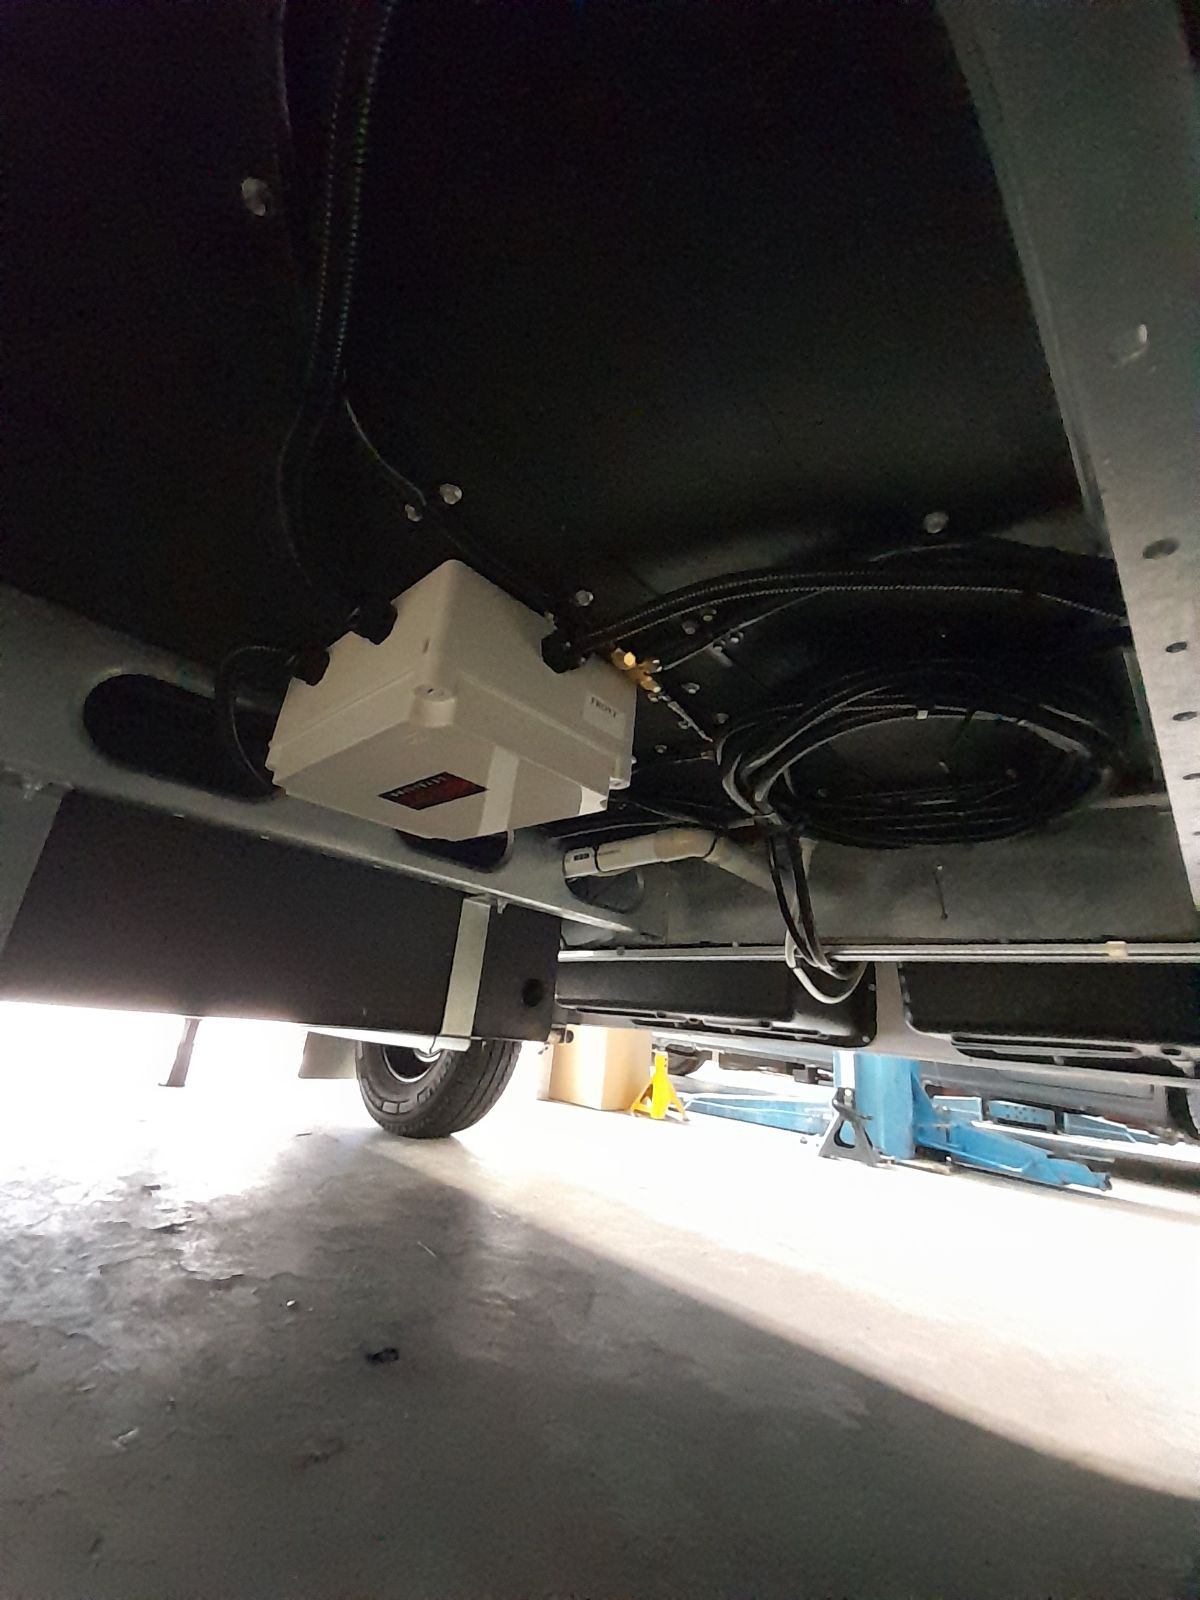 Redfoot Levelling - The underside of a car featuring the Redfoot Levelling Fiat ‘AutoLift’ System.